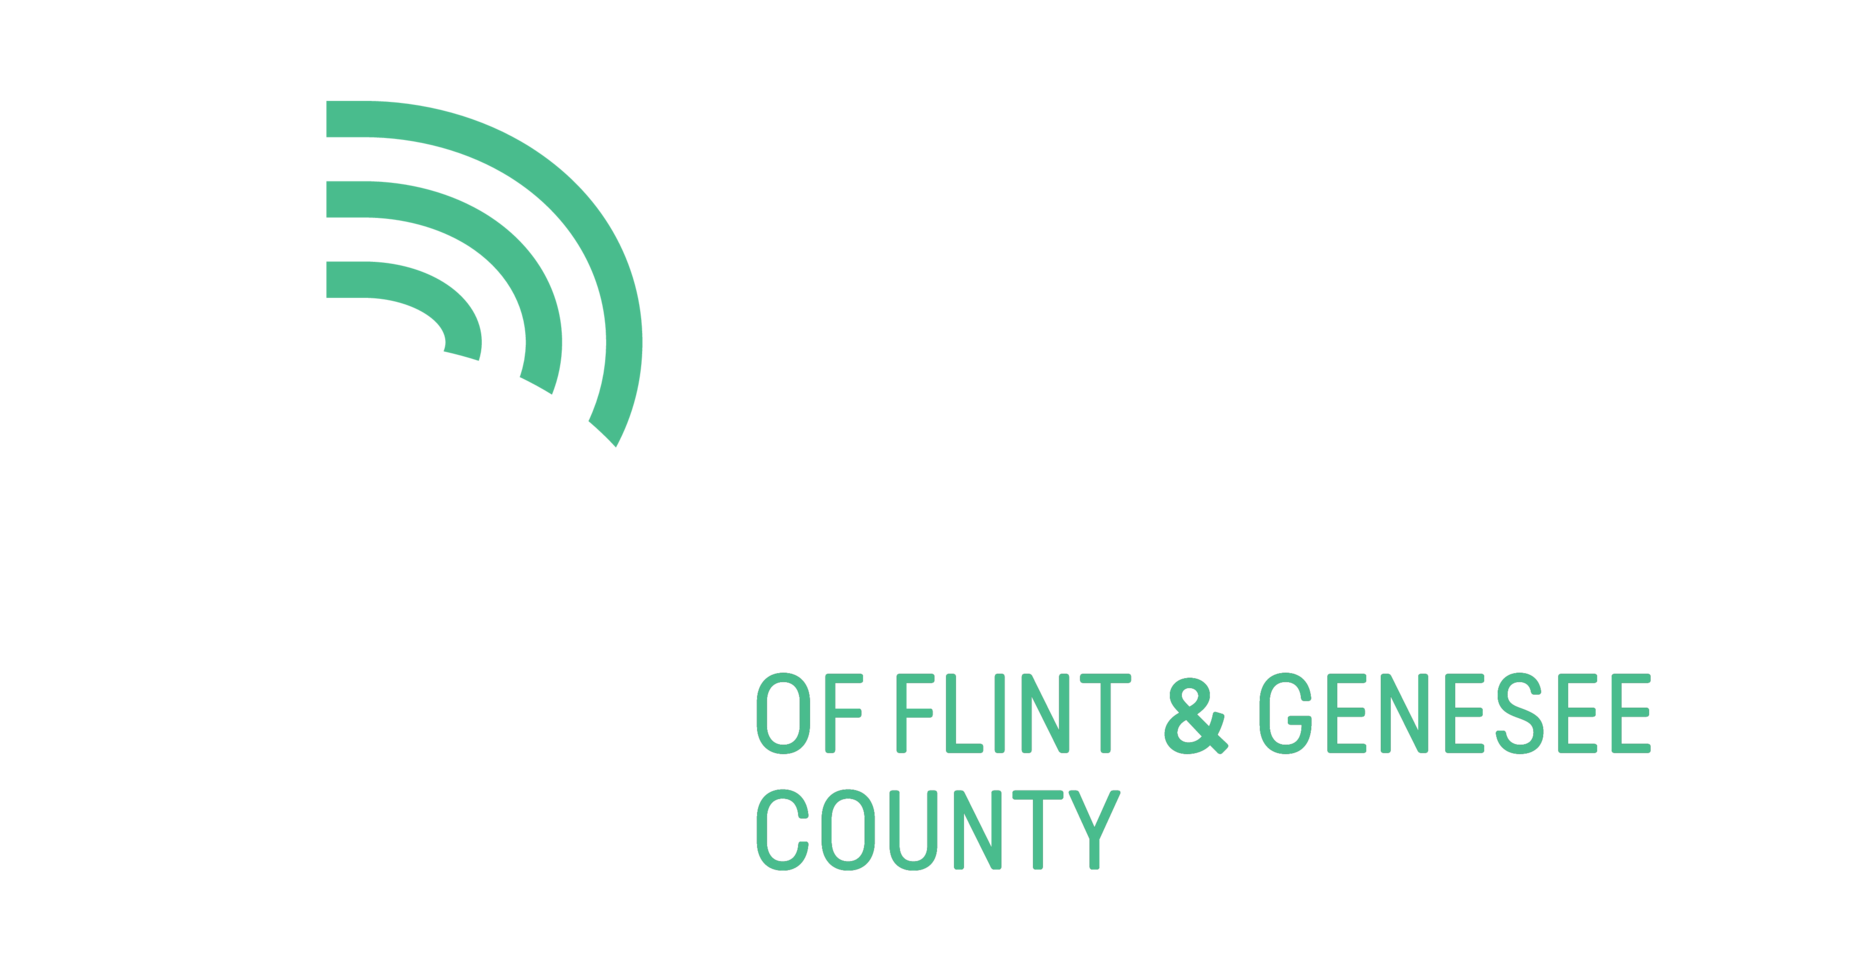 Big Brothers Big Sisters of Flint and Genesee County